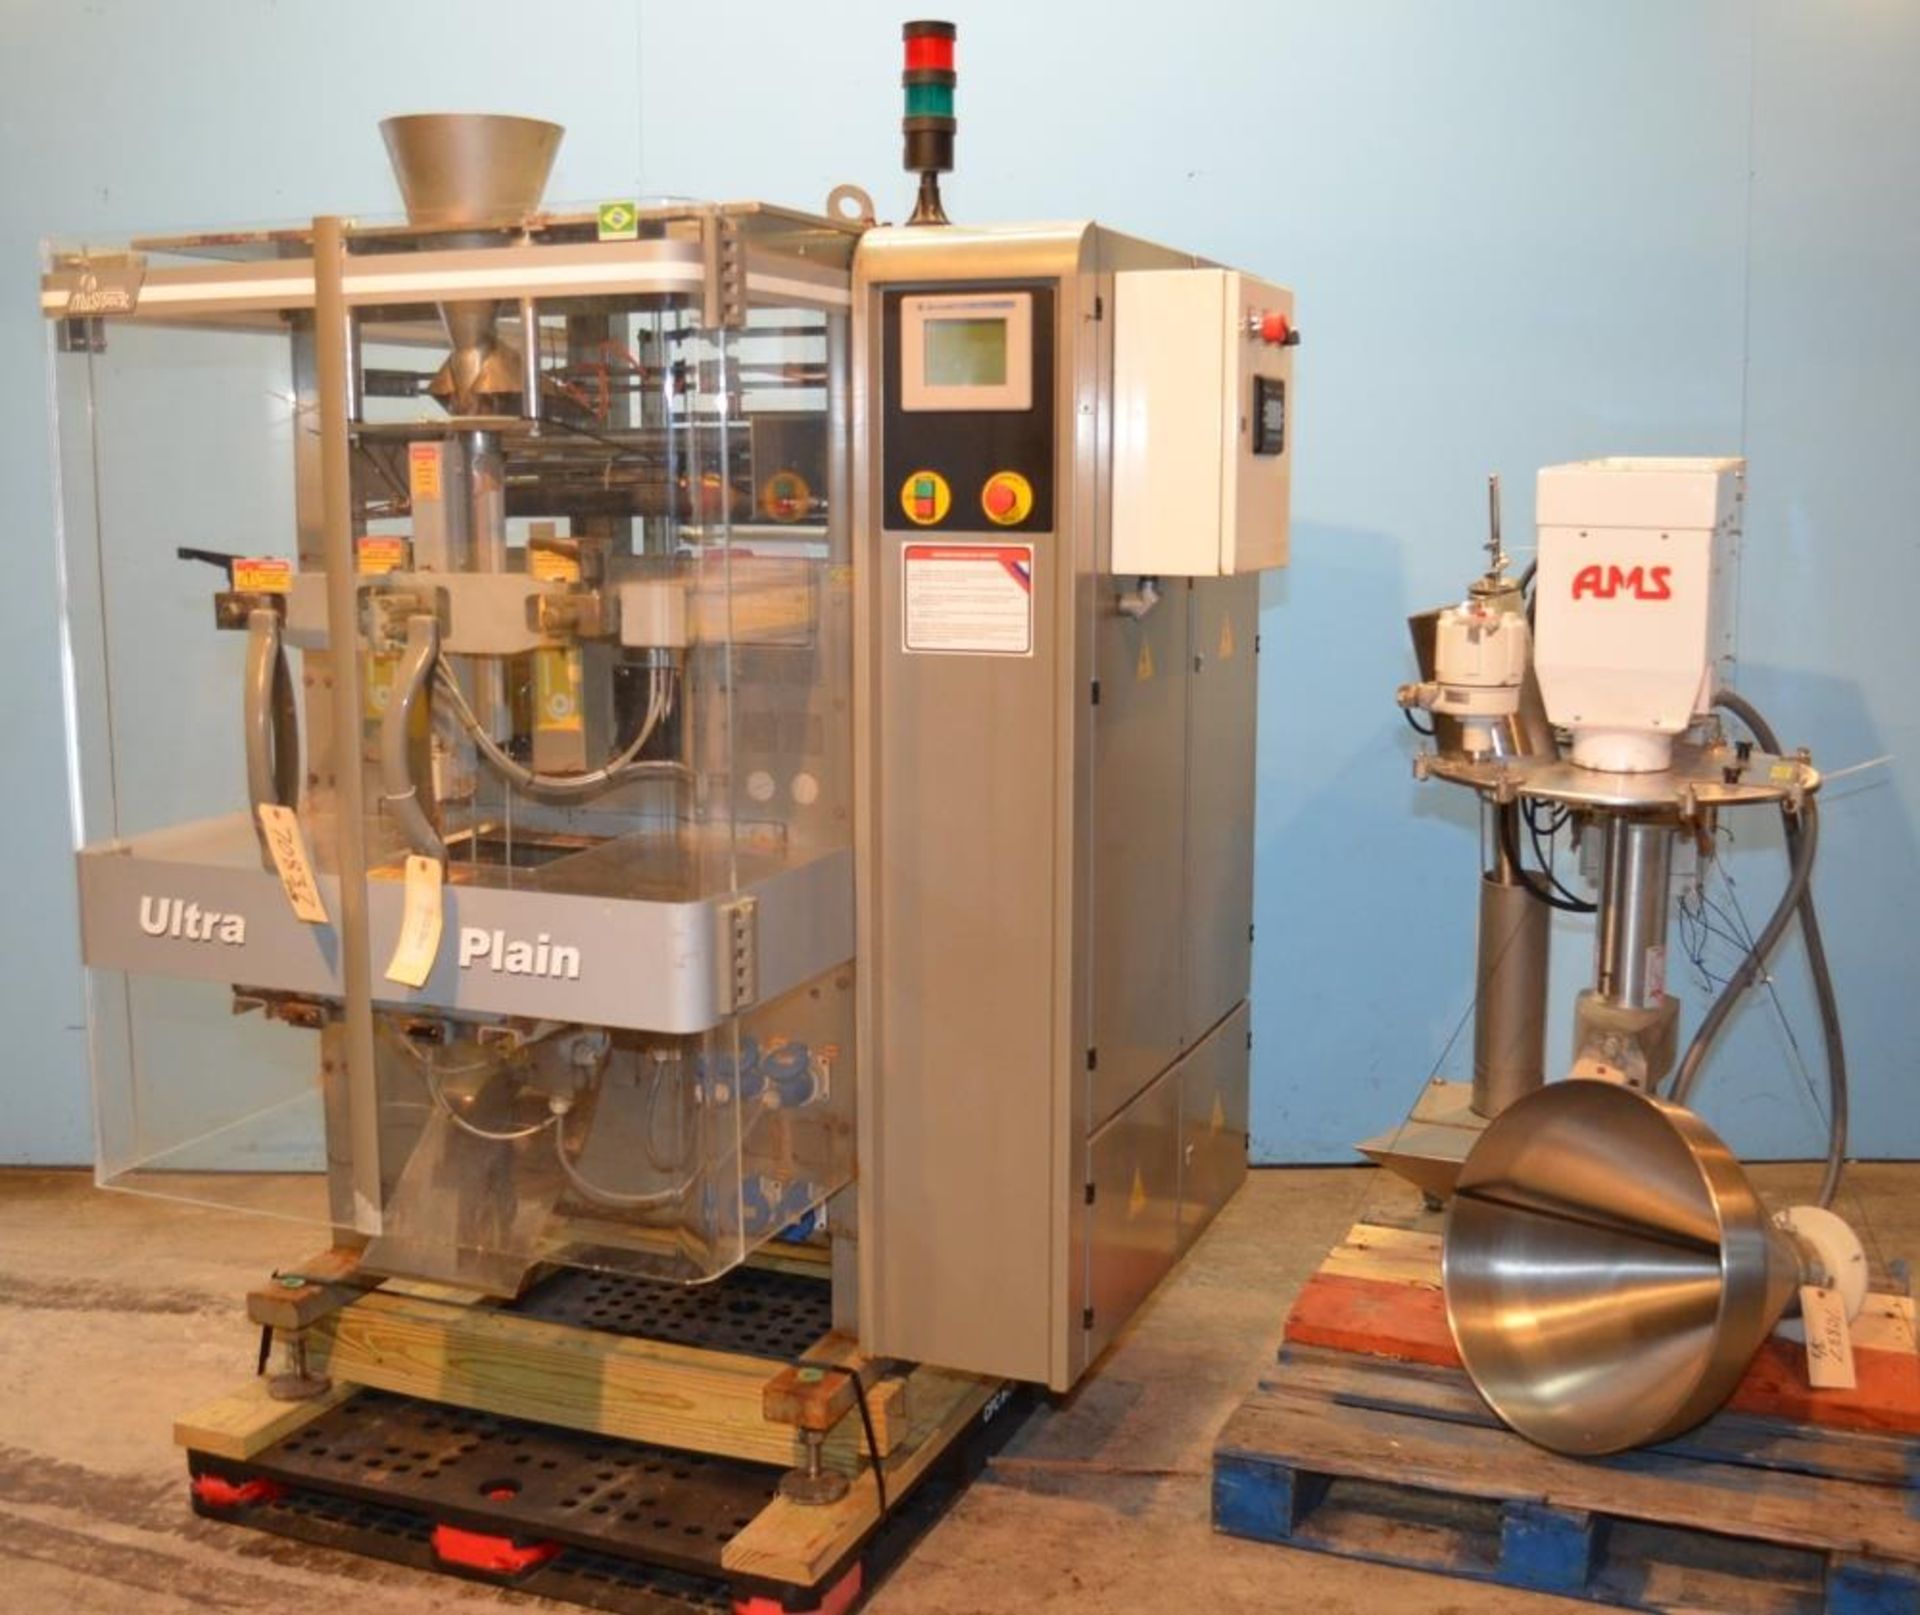 Masipack Mdl. 70001N0000 Ultra Plain Single Head Automatic Vertical Form, Fill and Seal Machine,